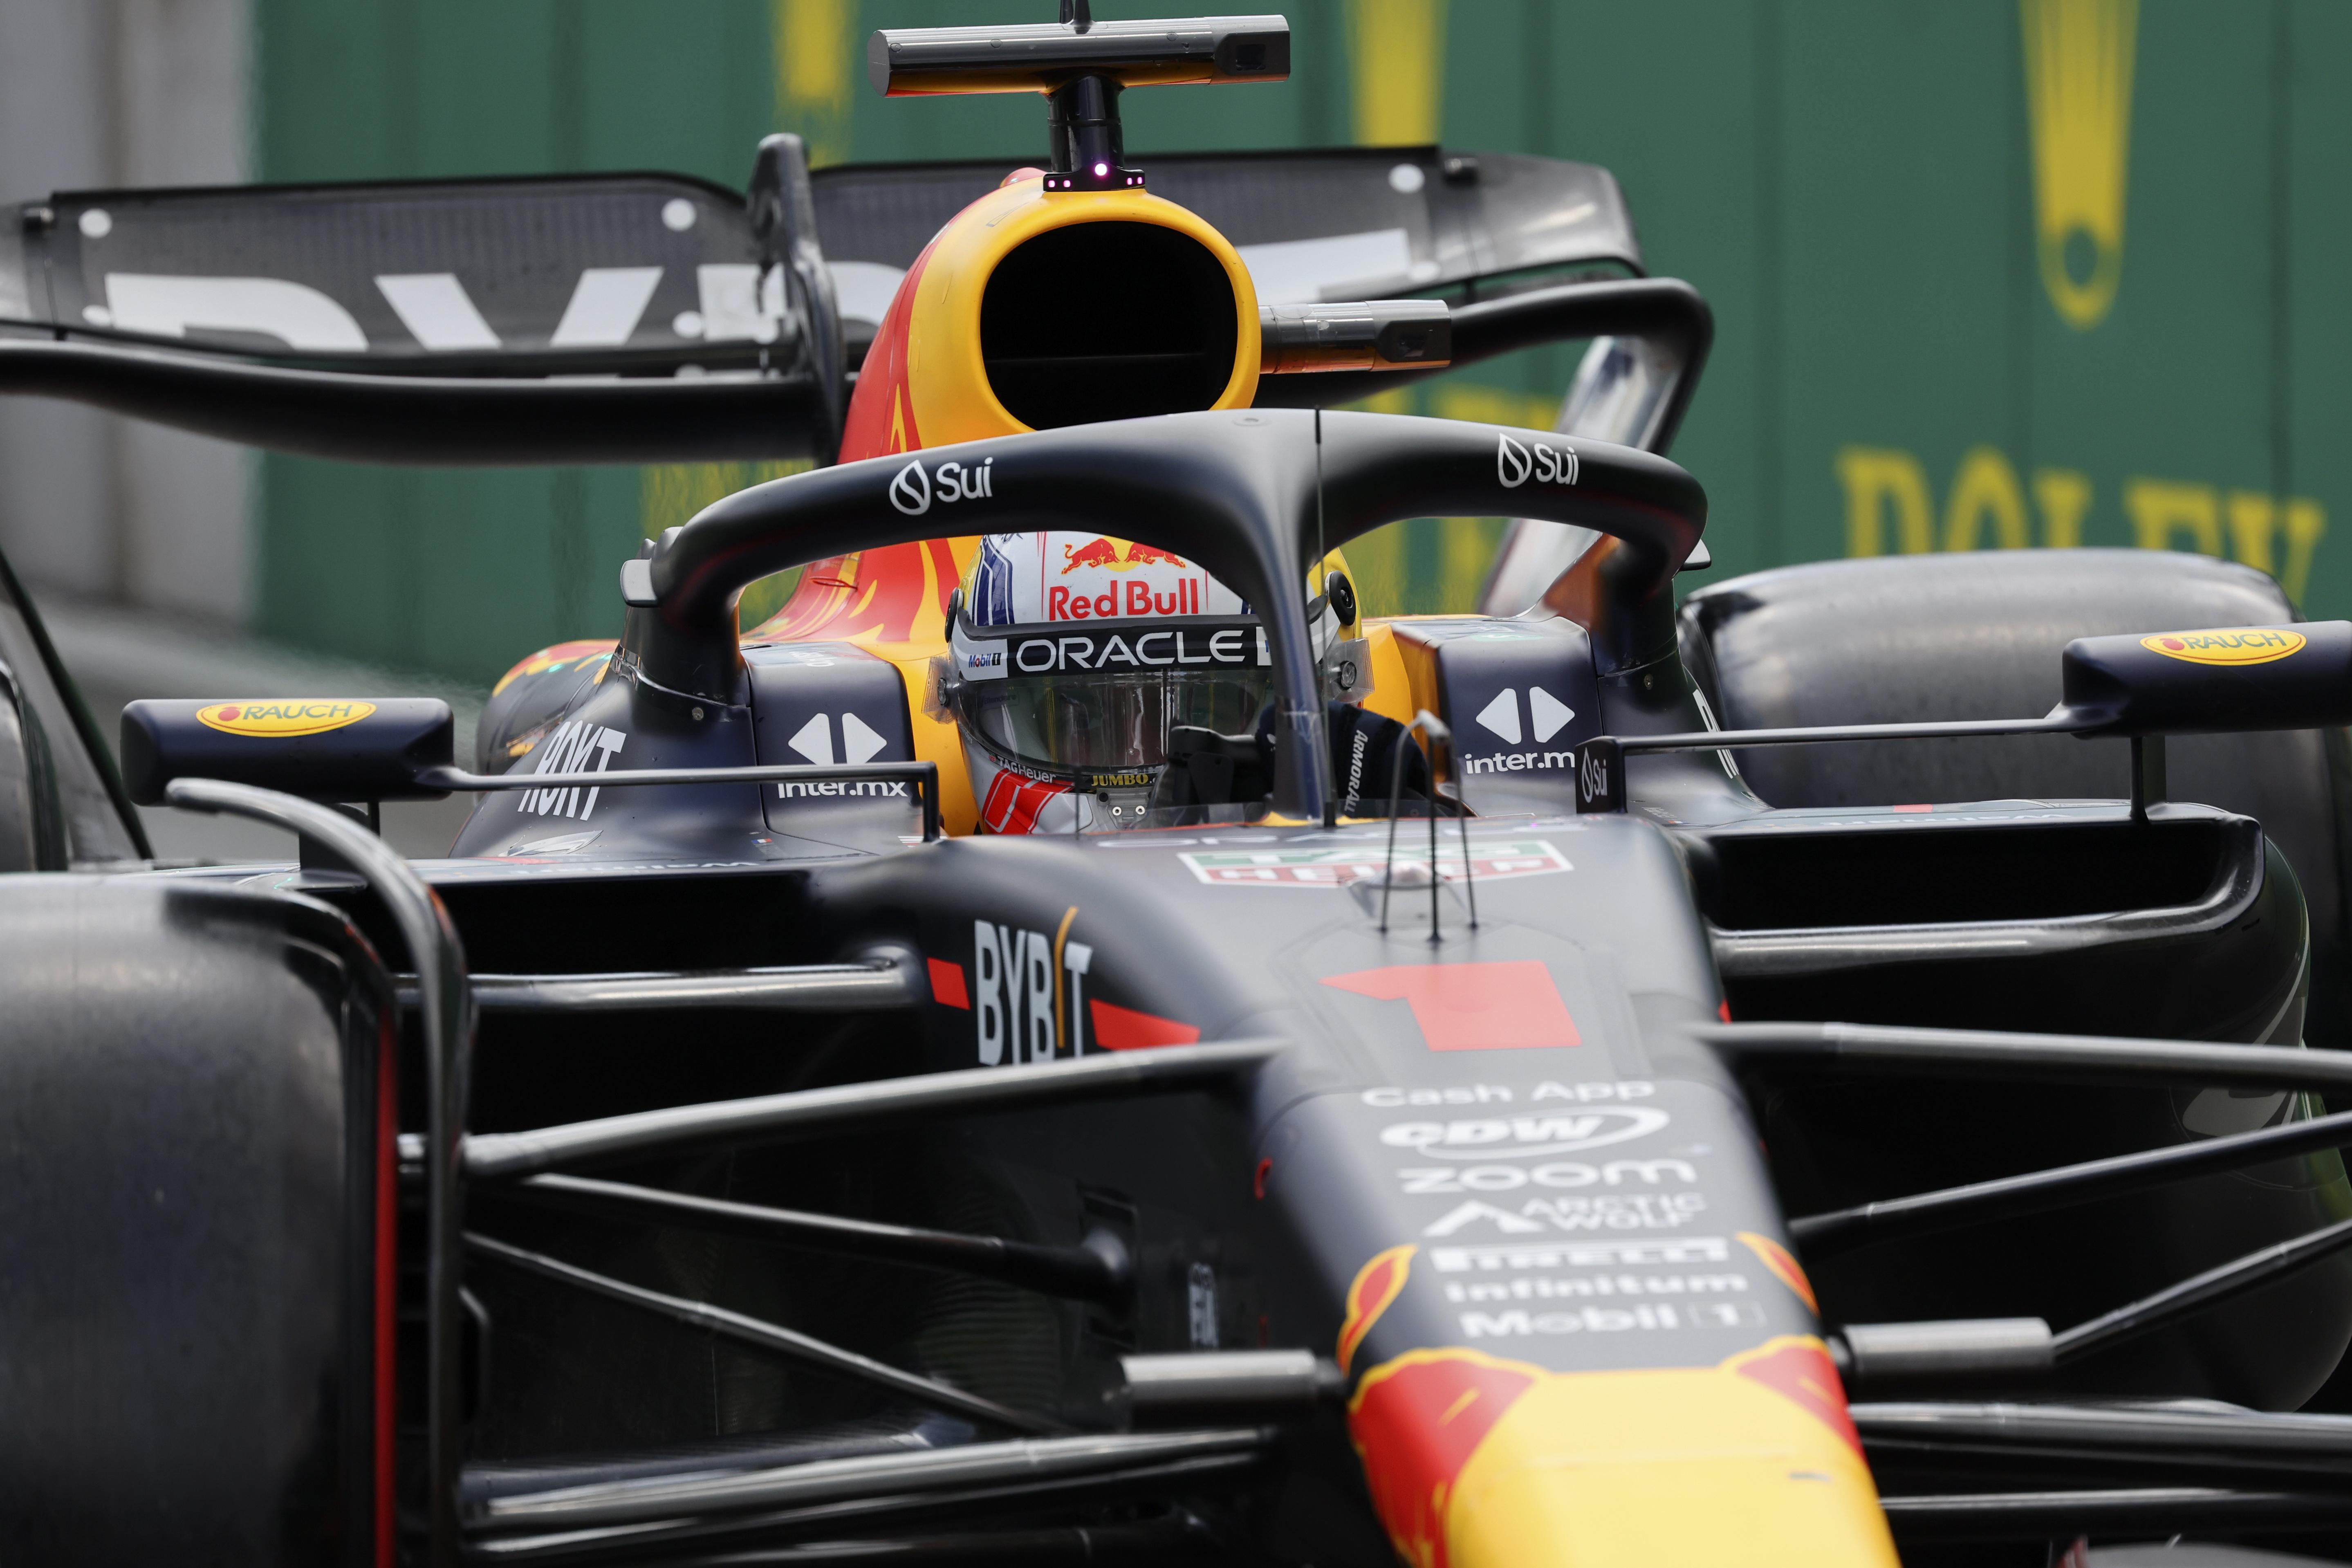 F1 leader Verstappen takes pole for Belgian GP sprint race ahead of Piastri 